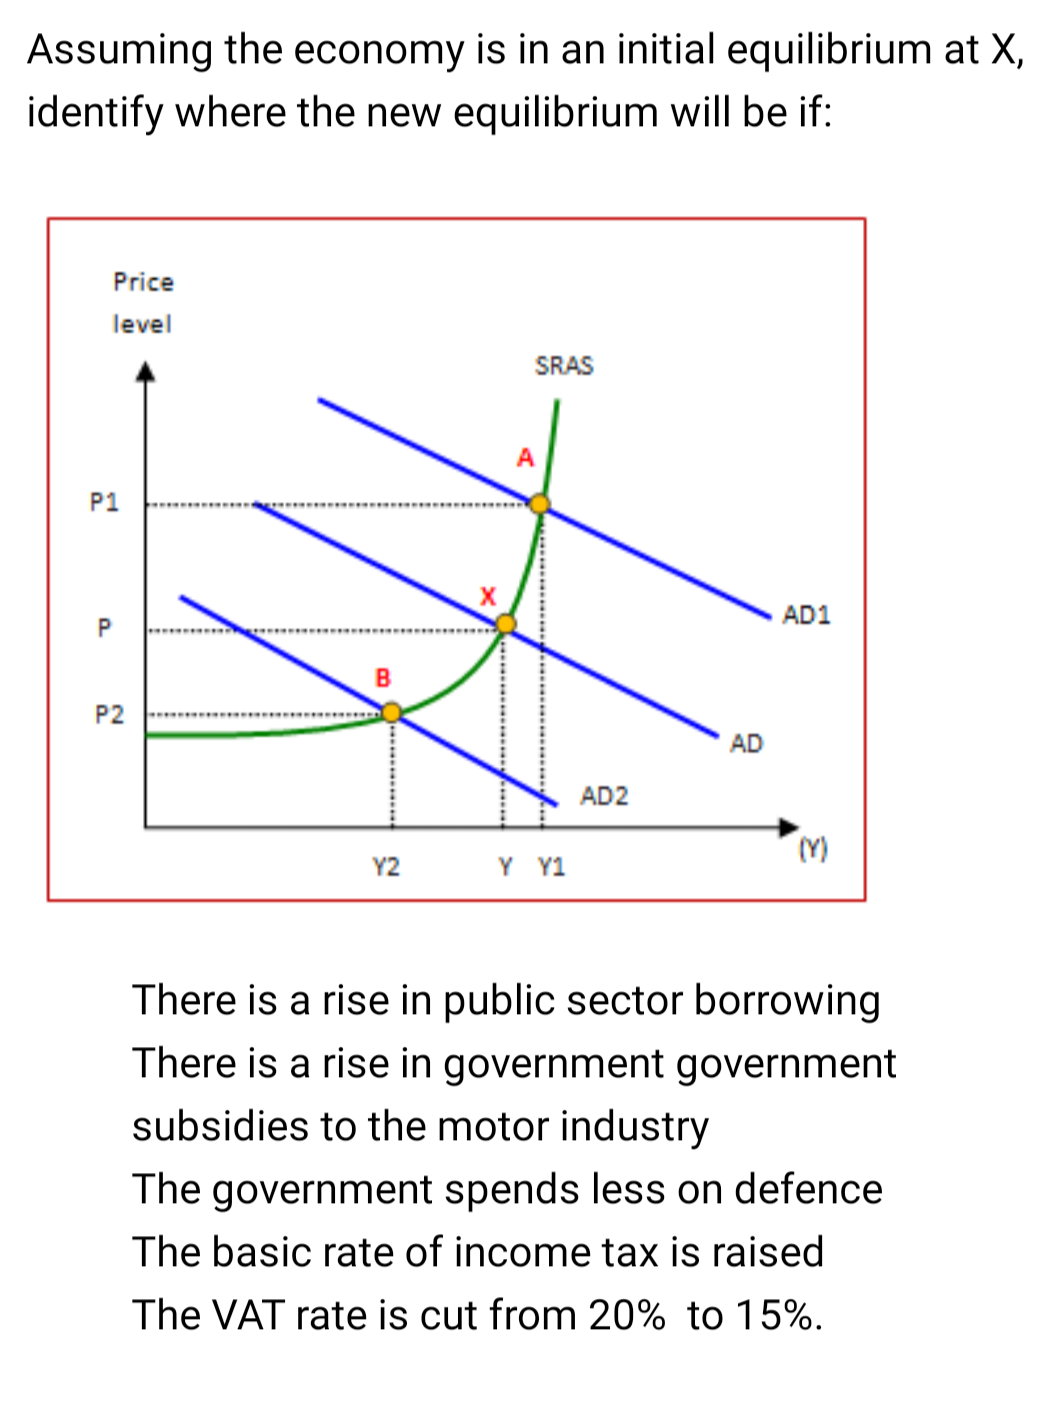 Assuming the economy is in an initial equilibrium at X,
identify where the new equilibrium will be if:
Price
level
SRAS
A
P1
AD1
P2
AD
AD2
Y2
Y Y1
There is a rise in public sector borrowing
There is a rise in government government
subsidies to the motor industry
The government spends less on defence
The basic rate of income tax is raised
The VAT rate is cut from 20% to 15%.
P.
